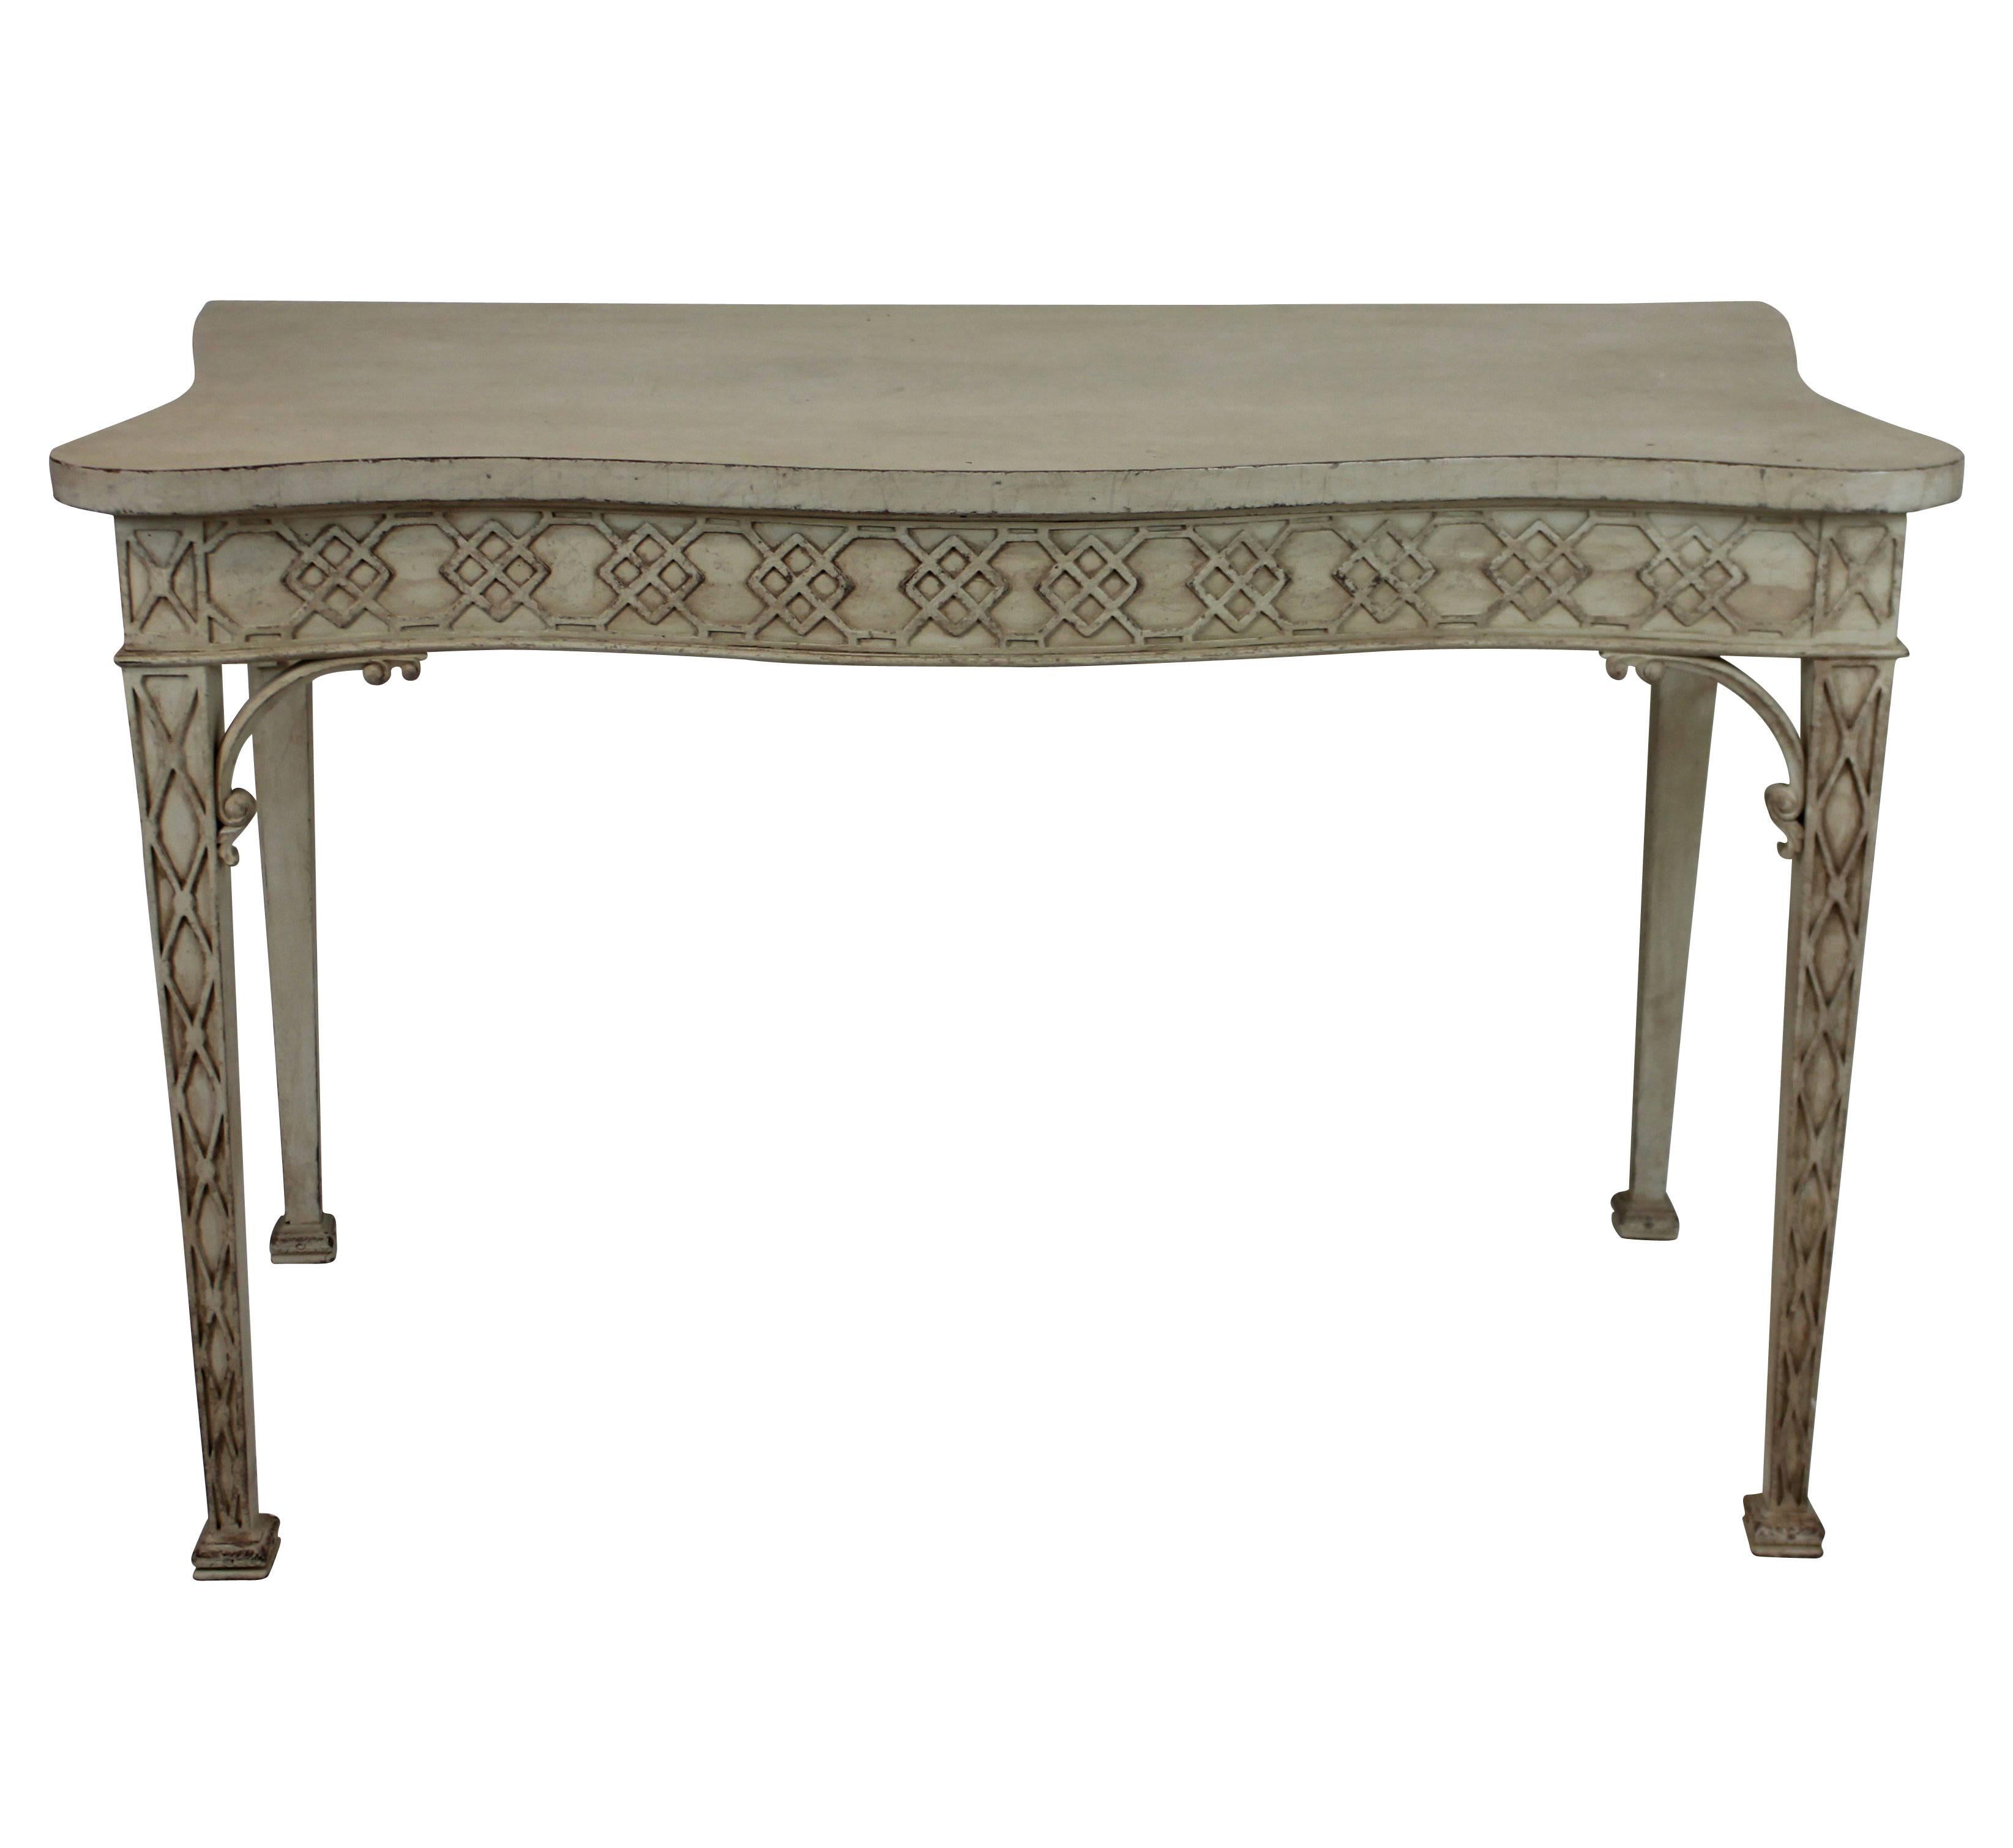 A large English painted console table in the manner of Chippendale. With a serpentine front and lattice work frieze and tapering legs.
    